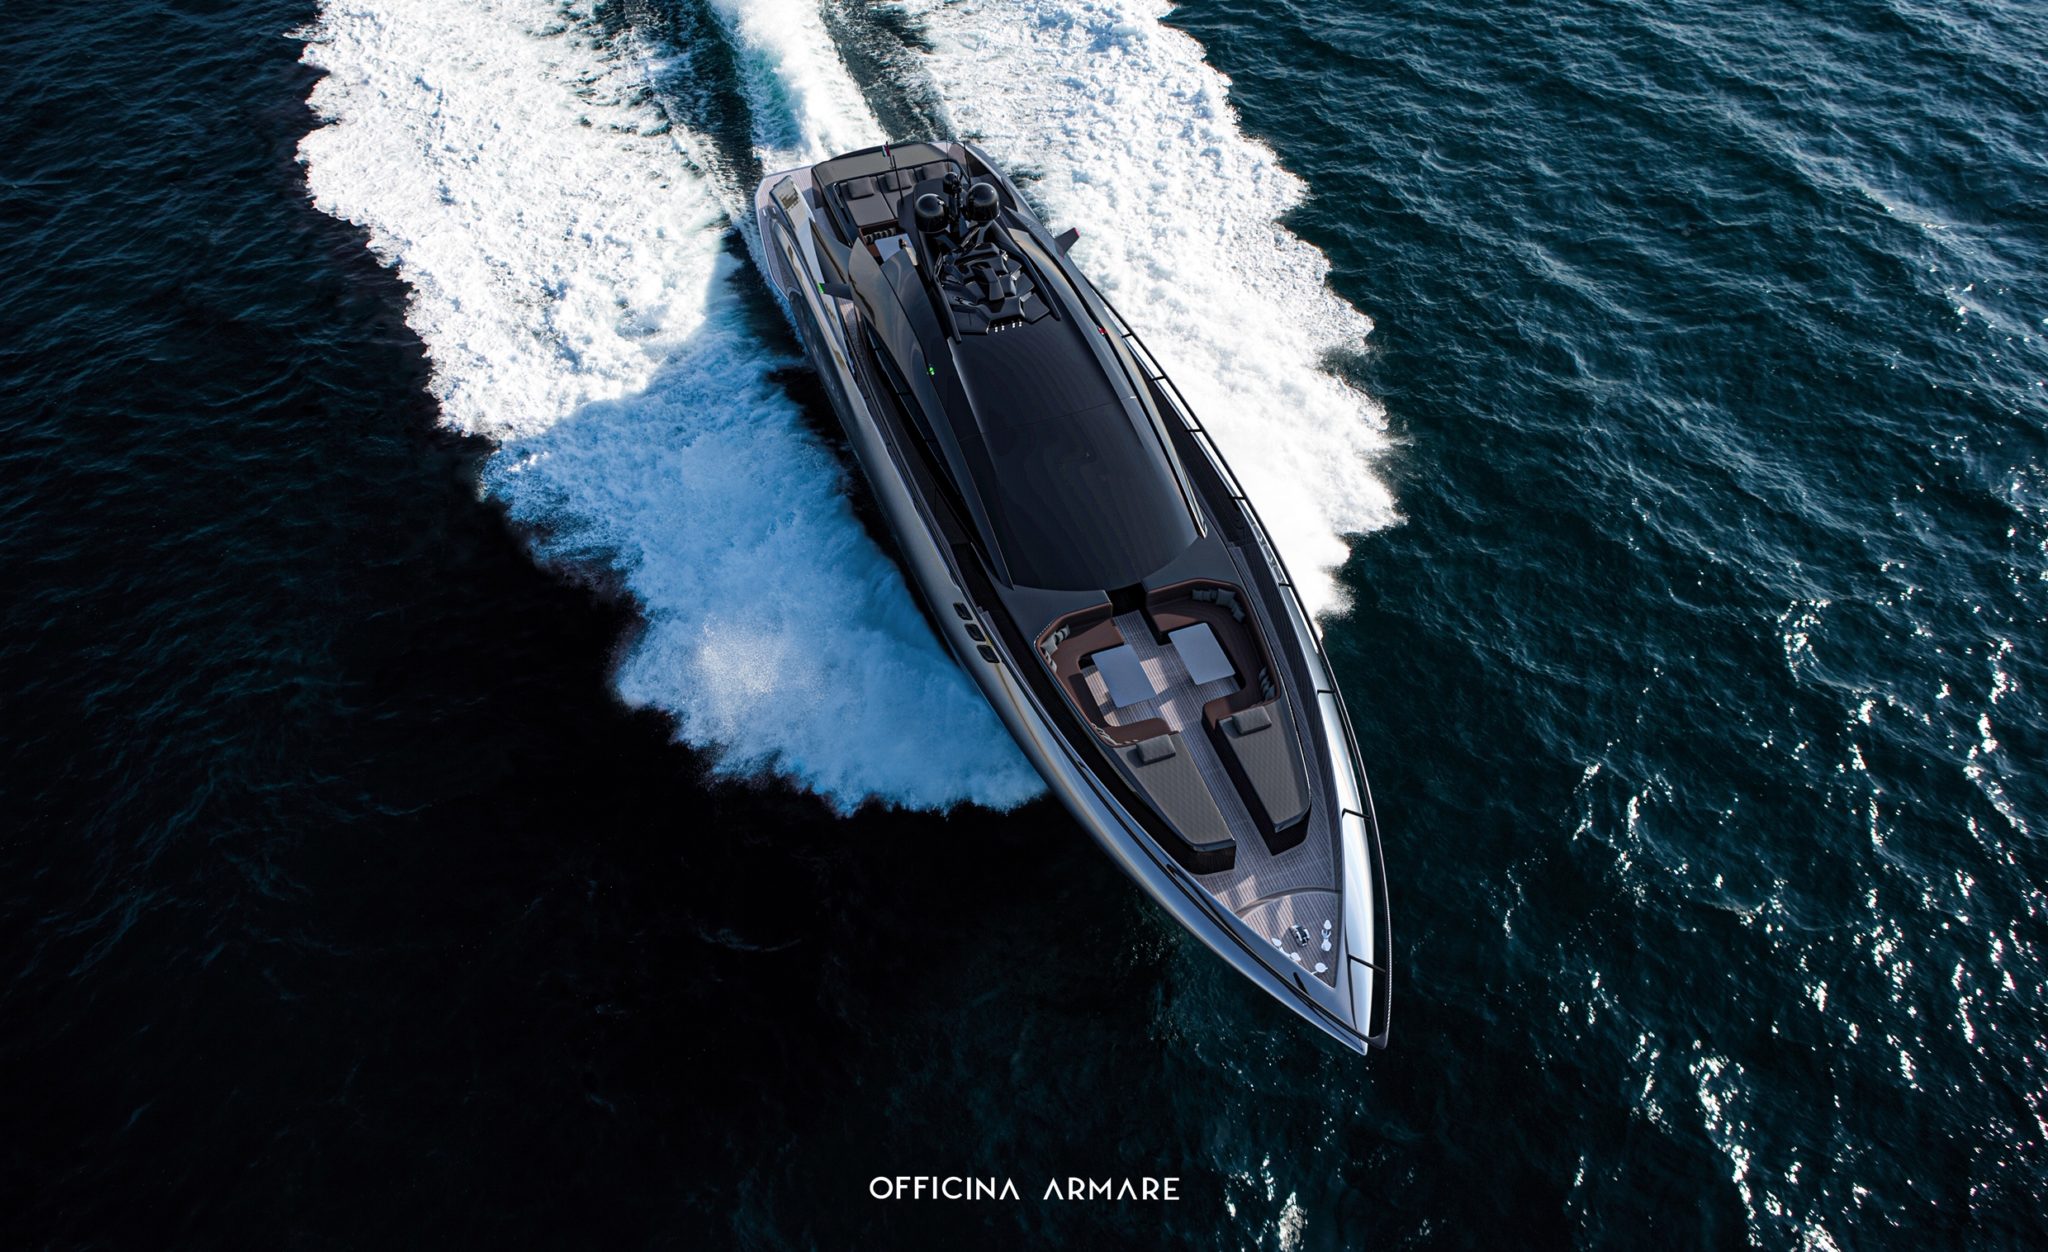 Milan-based yacht design studio Officina Armare drew heavily from supercars in designing the new A88 Gransport concept.